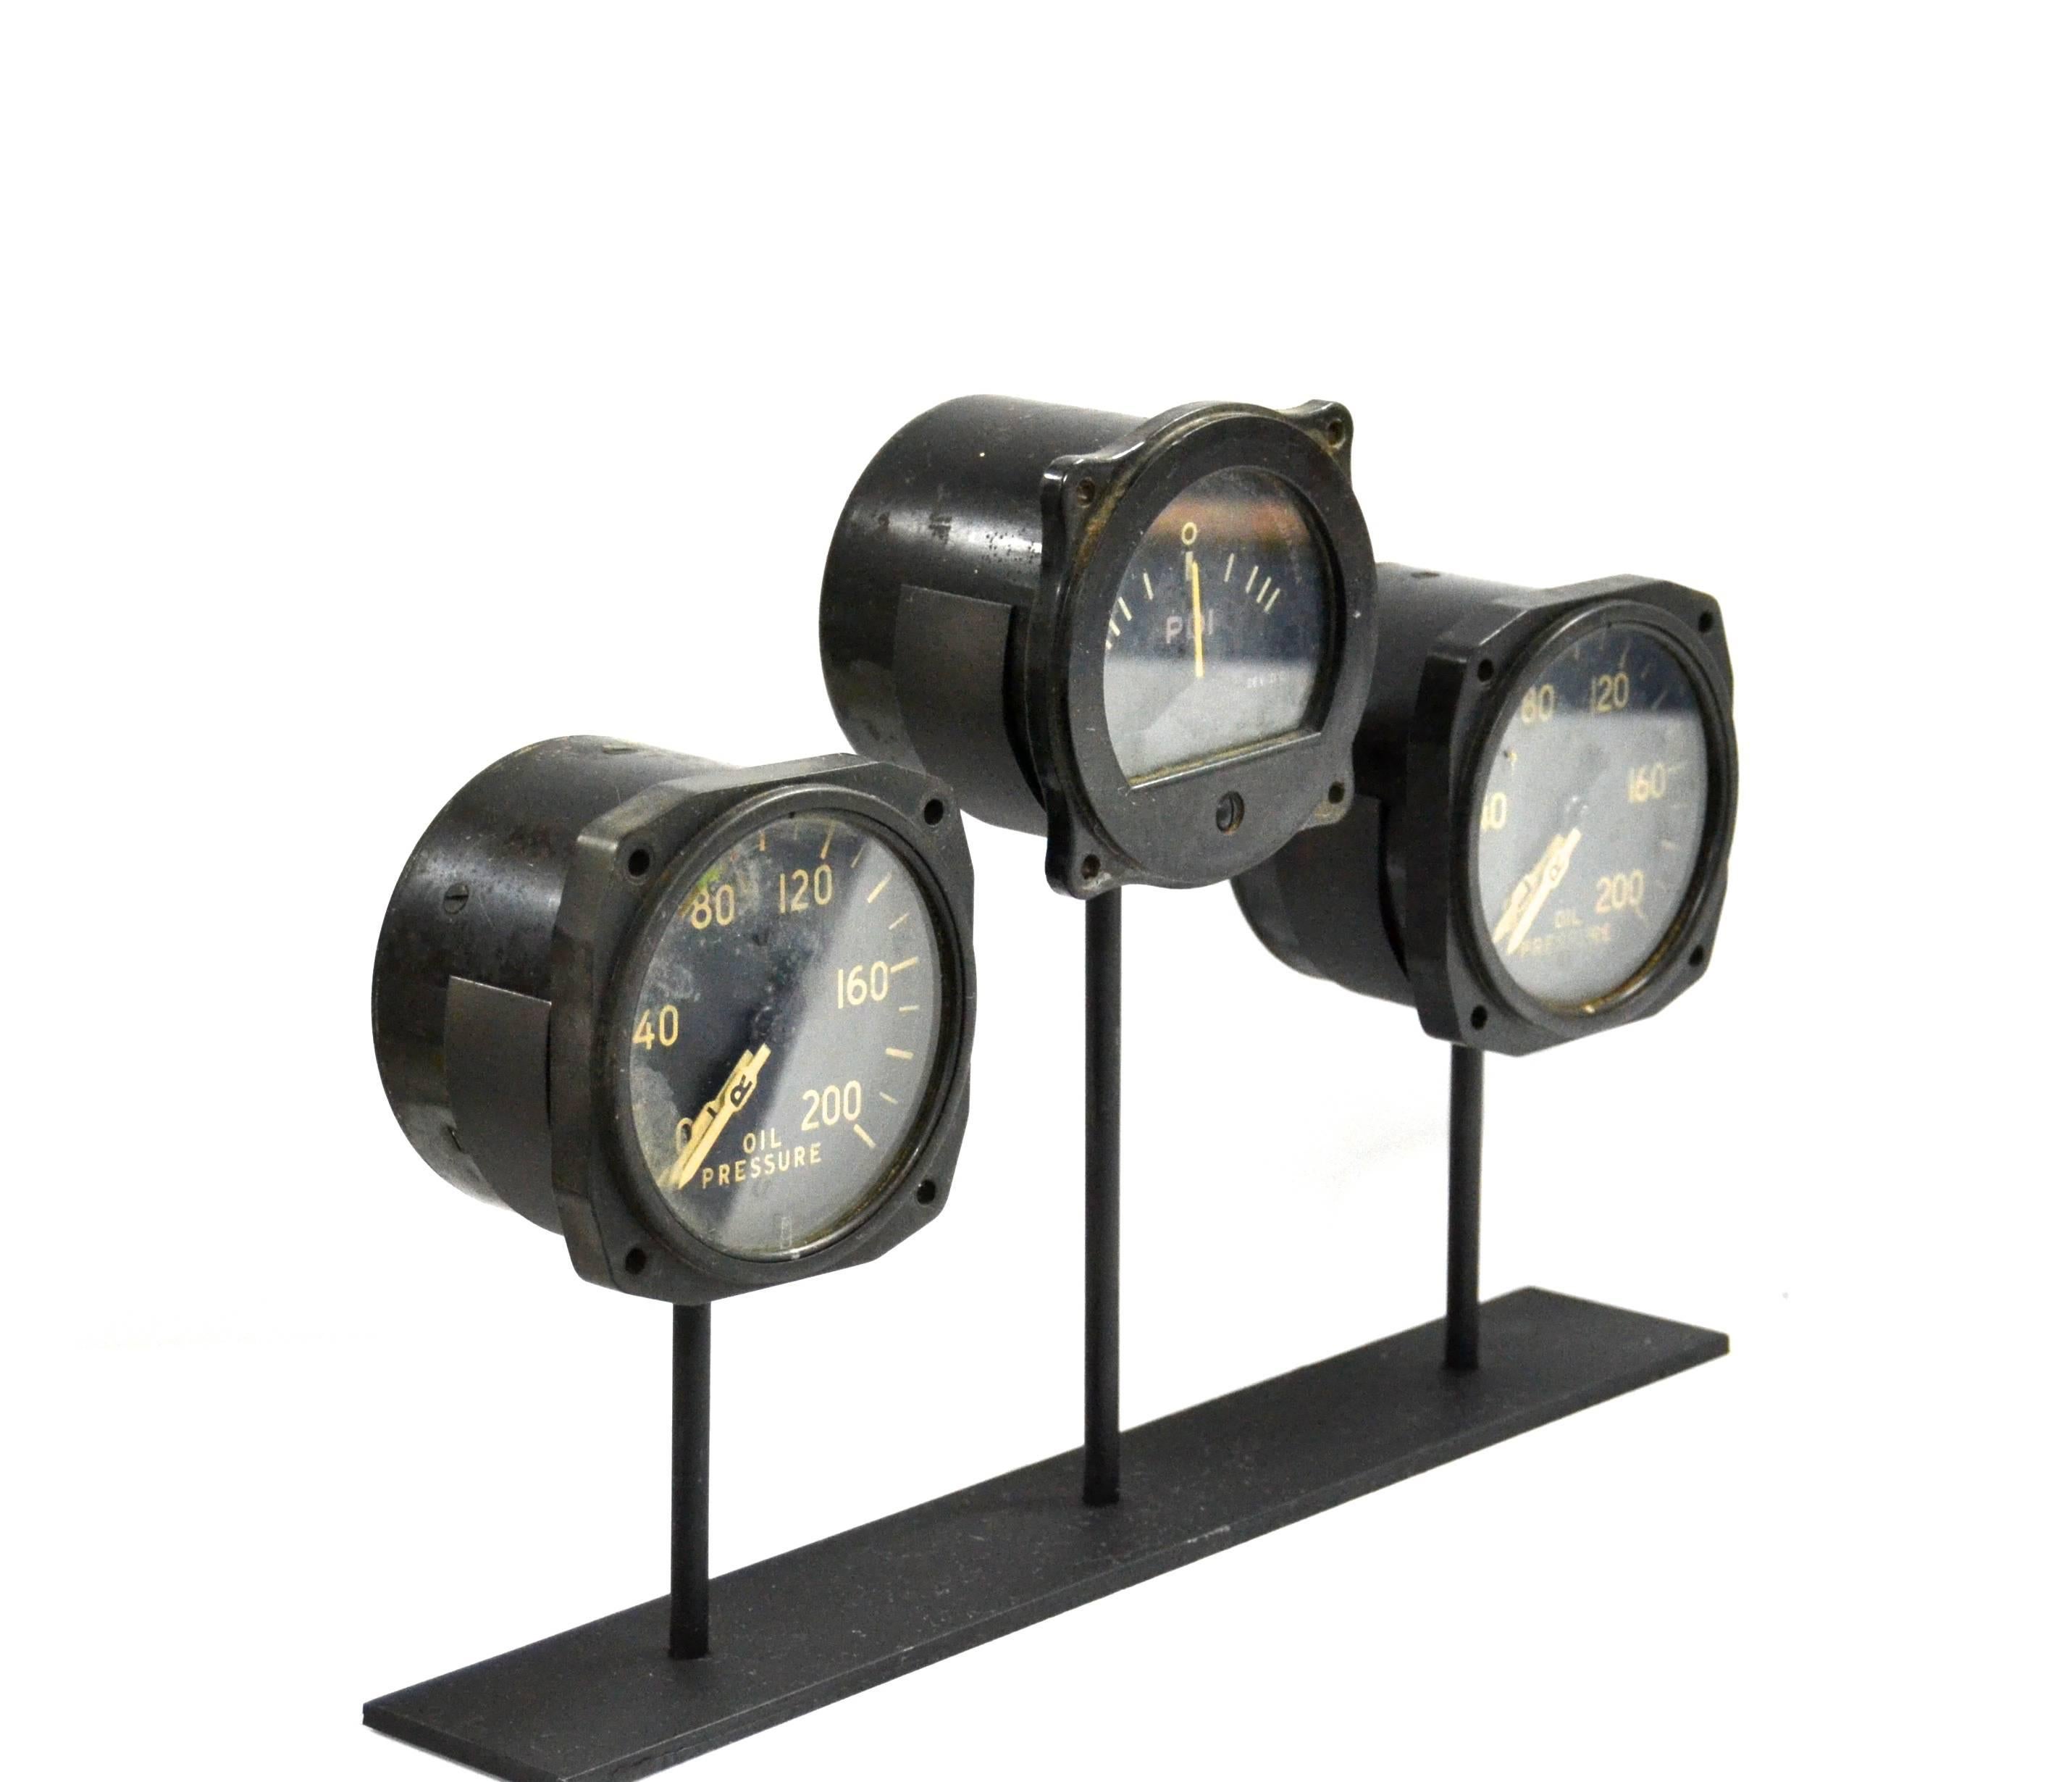 Authentic 74 year old WWII B-17 flying fortress & B-24 liberators cockpit instrument panel gauges

Three gauges on a custom-made metal museum stand. PDI gauges, (see description below)
Two very rare L R gauges (left engine, right engine) The